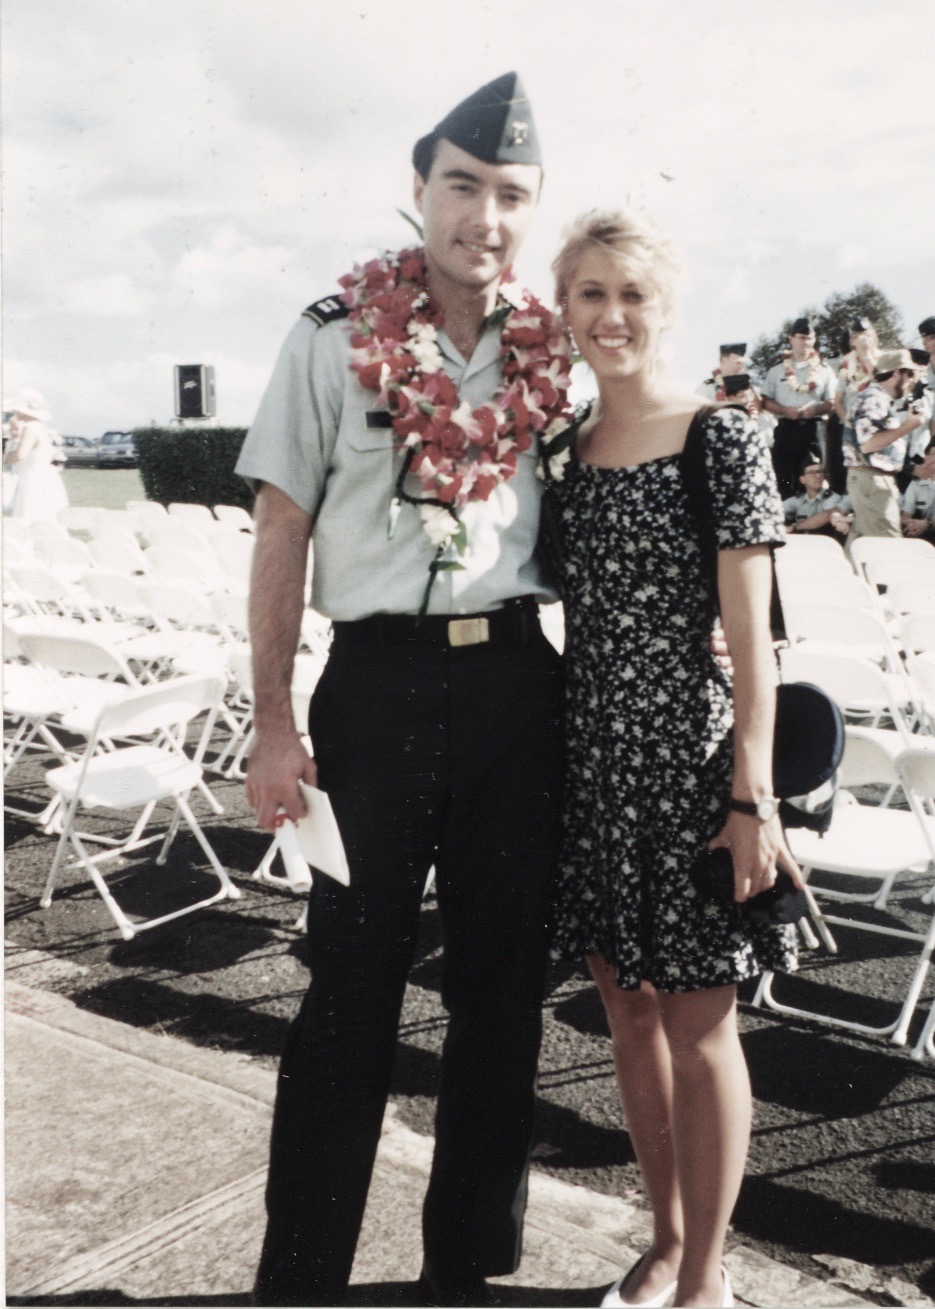 Me and Julie at my general surgery residency graduation ceremony, 1994.